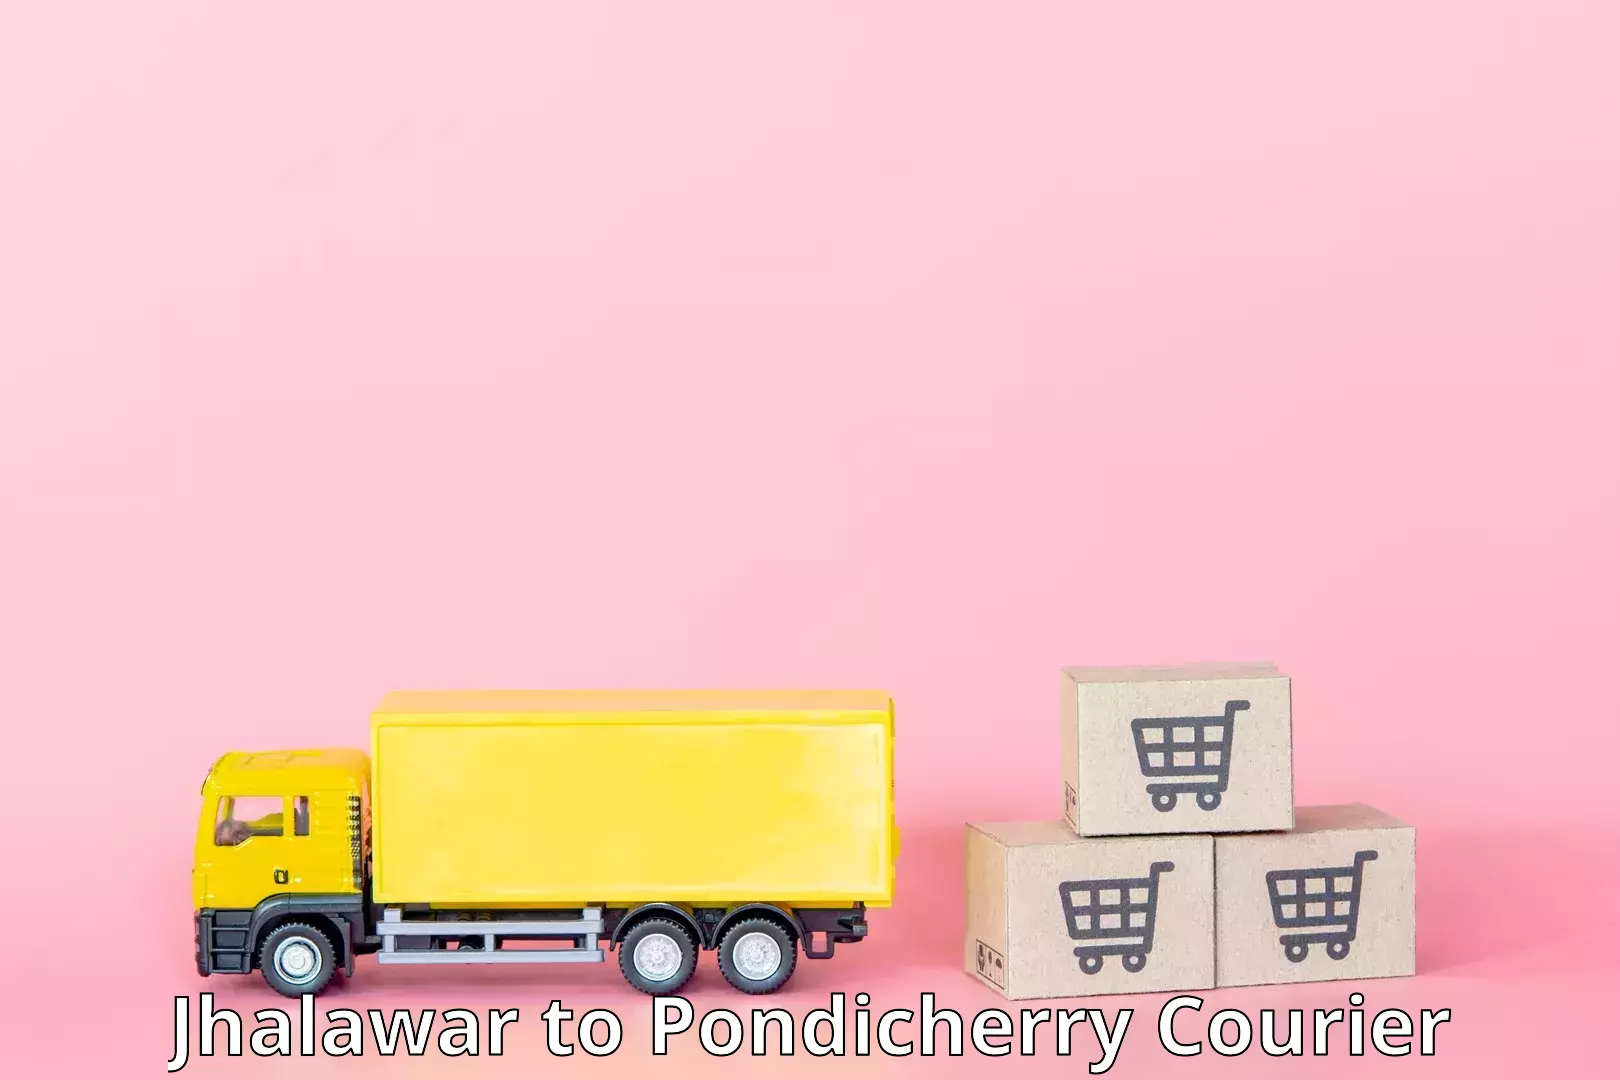 Express delivery capabilities Jhalawar to Pondicherry